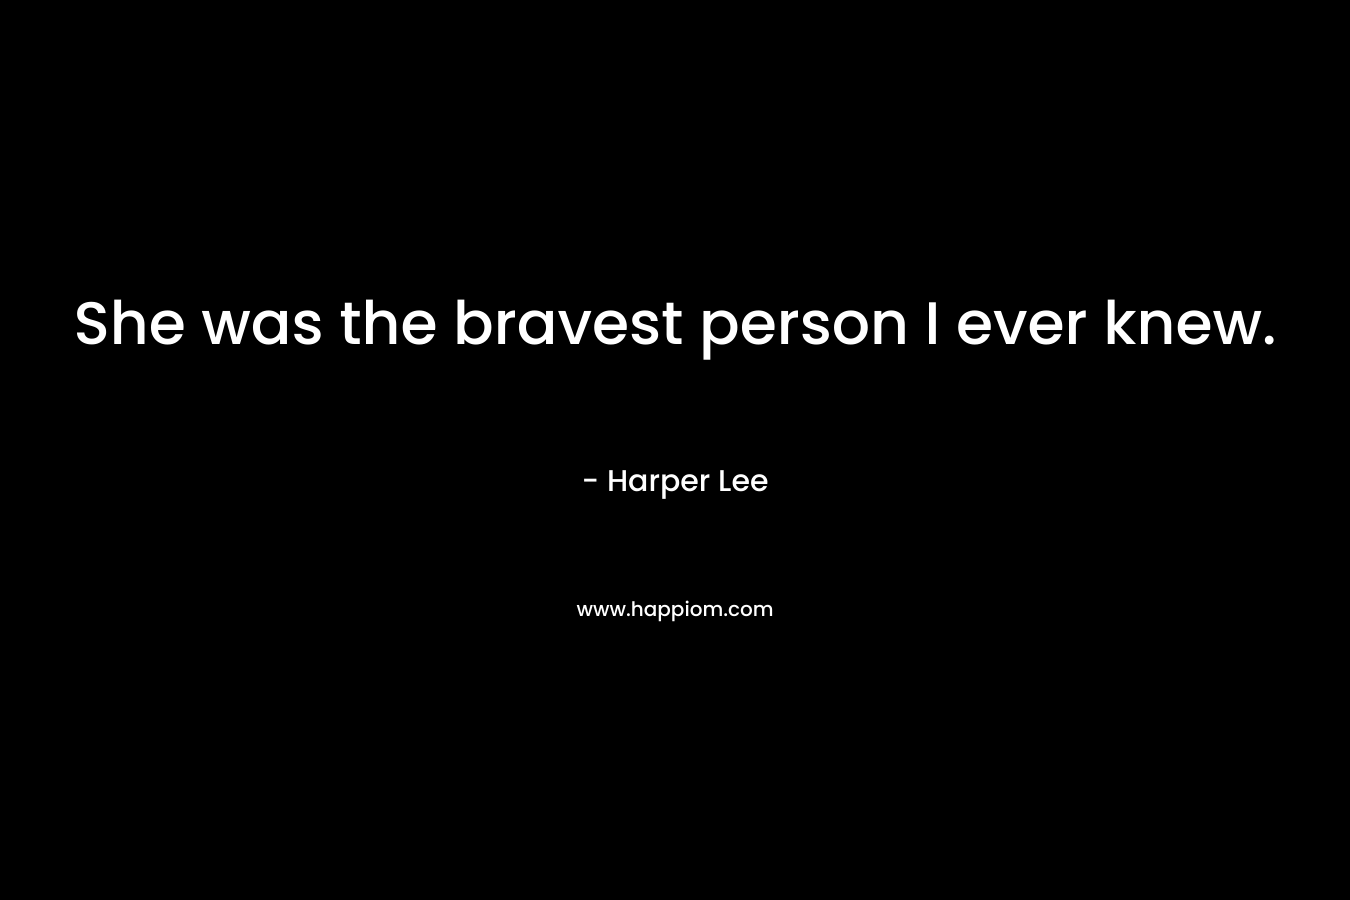 She was the bravest person I ever knew.